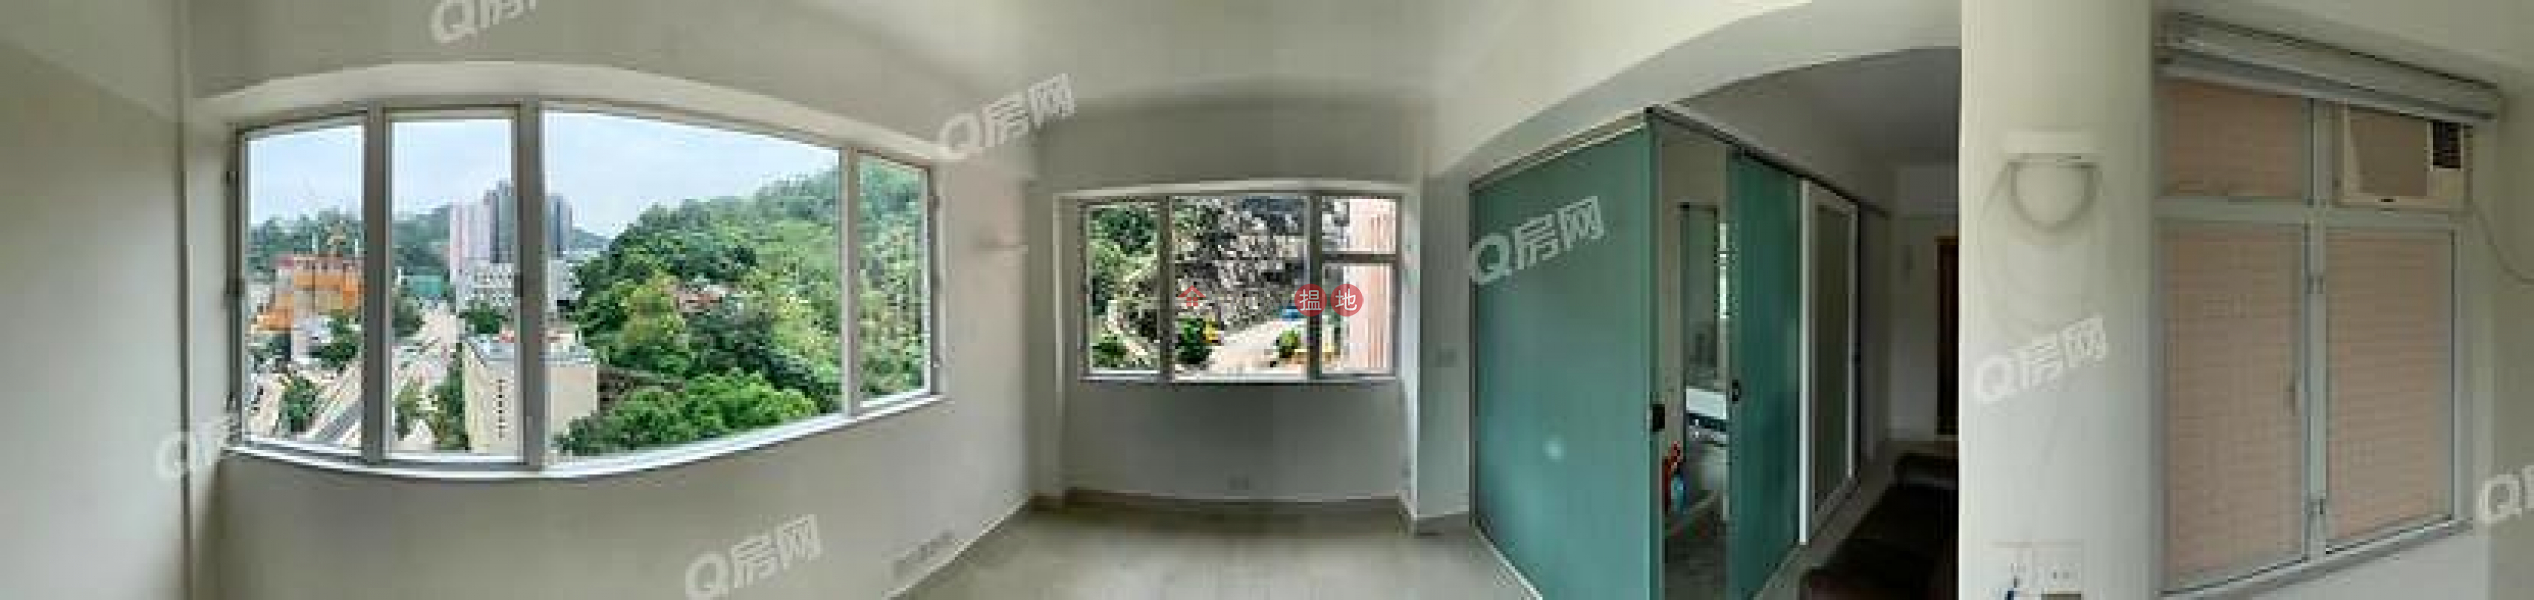 HK$ 4.6M | Tung On Building | Eastern District Tung On Building | High Floor Flat for Sale